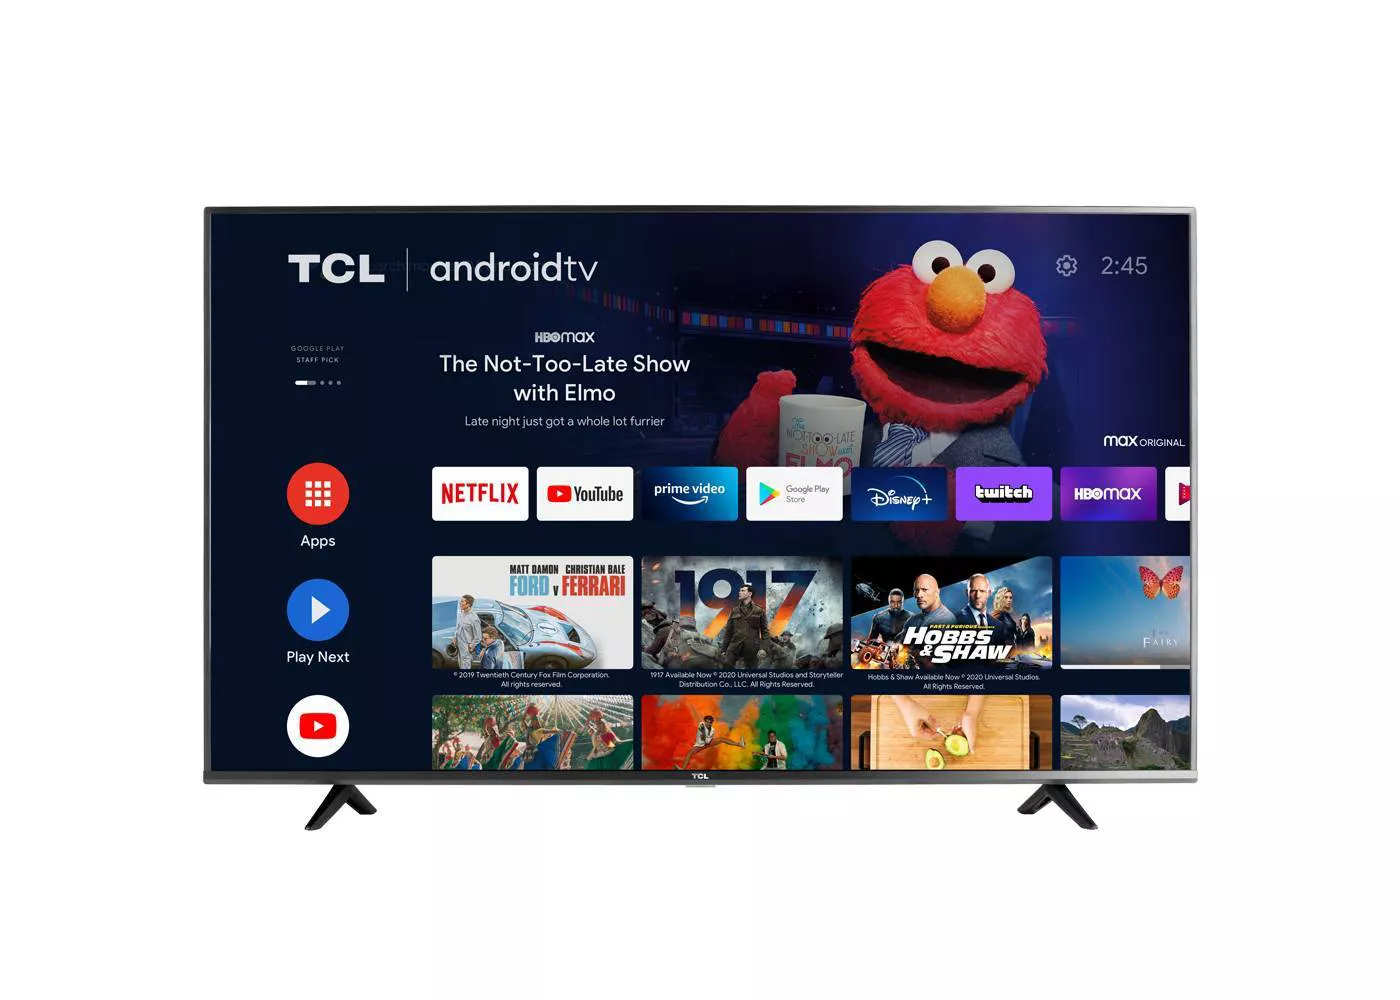 TCL 65" Class 4-Series 4K UHD HDR Smart Android TV – 65S434 - image 1 of 12